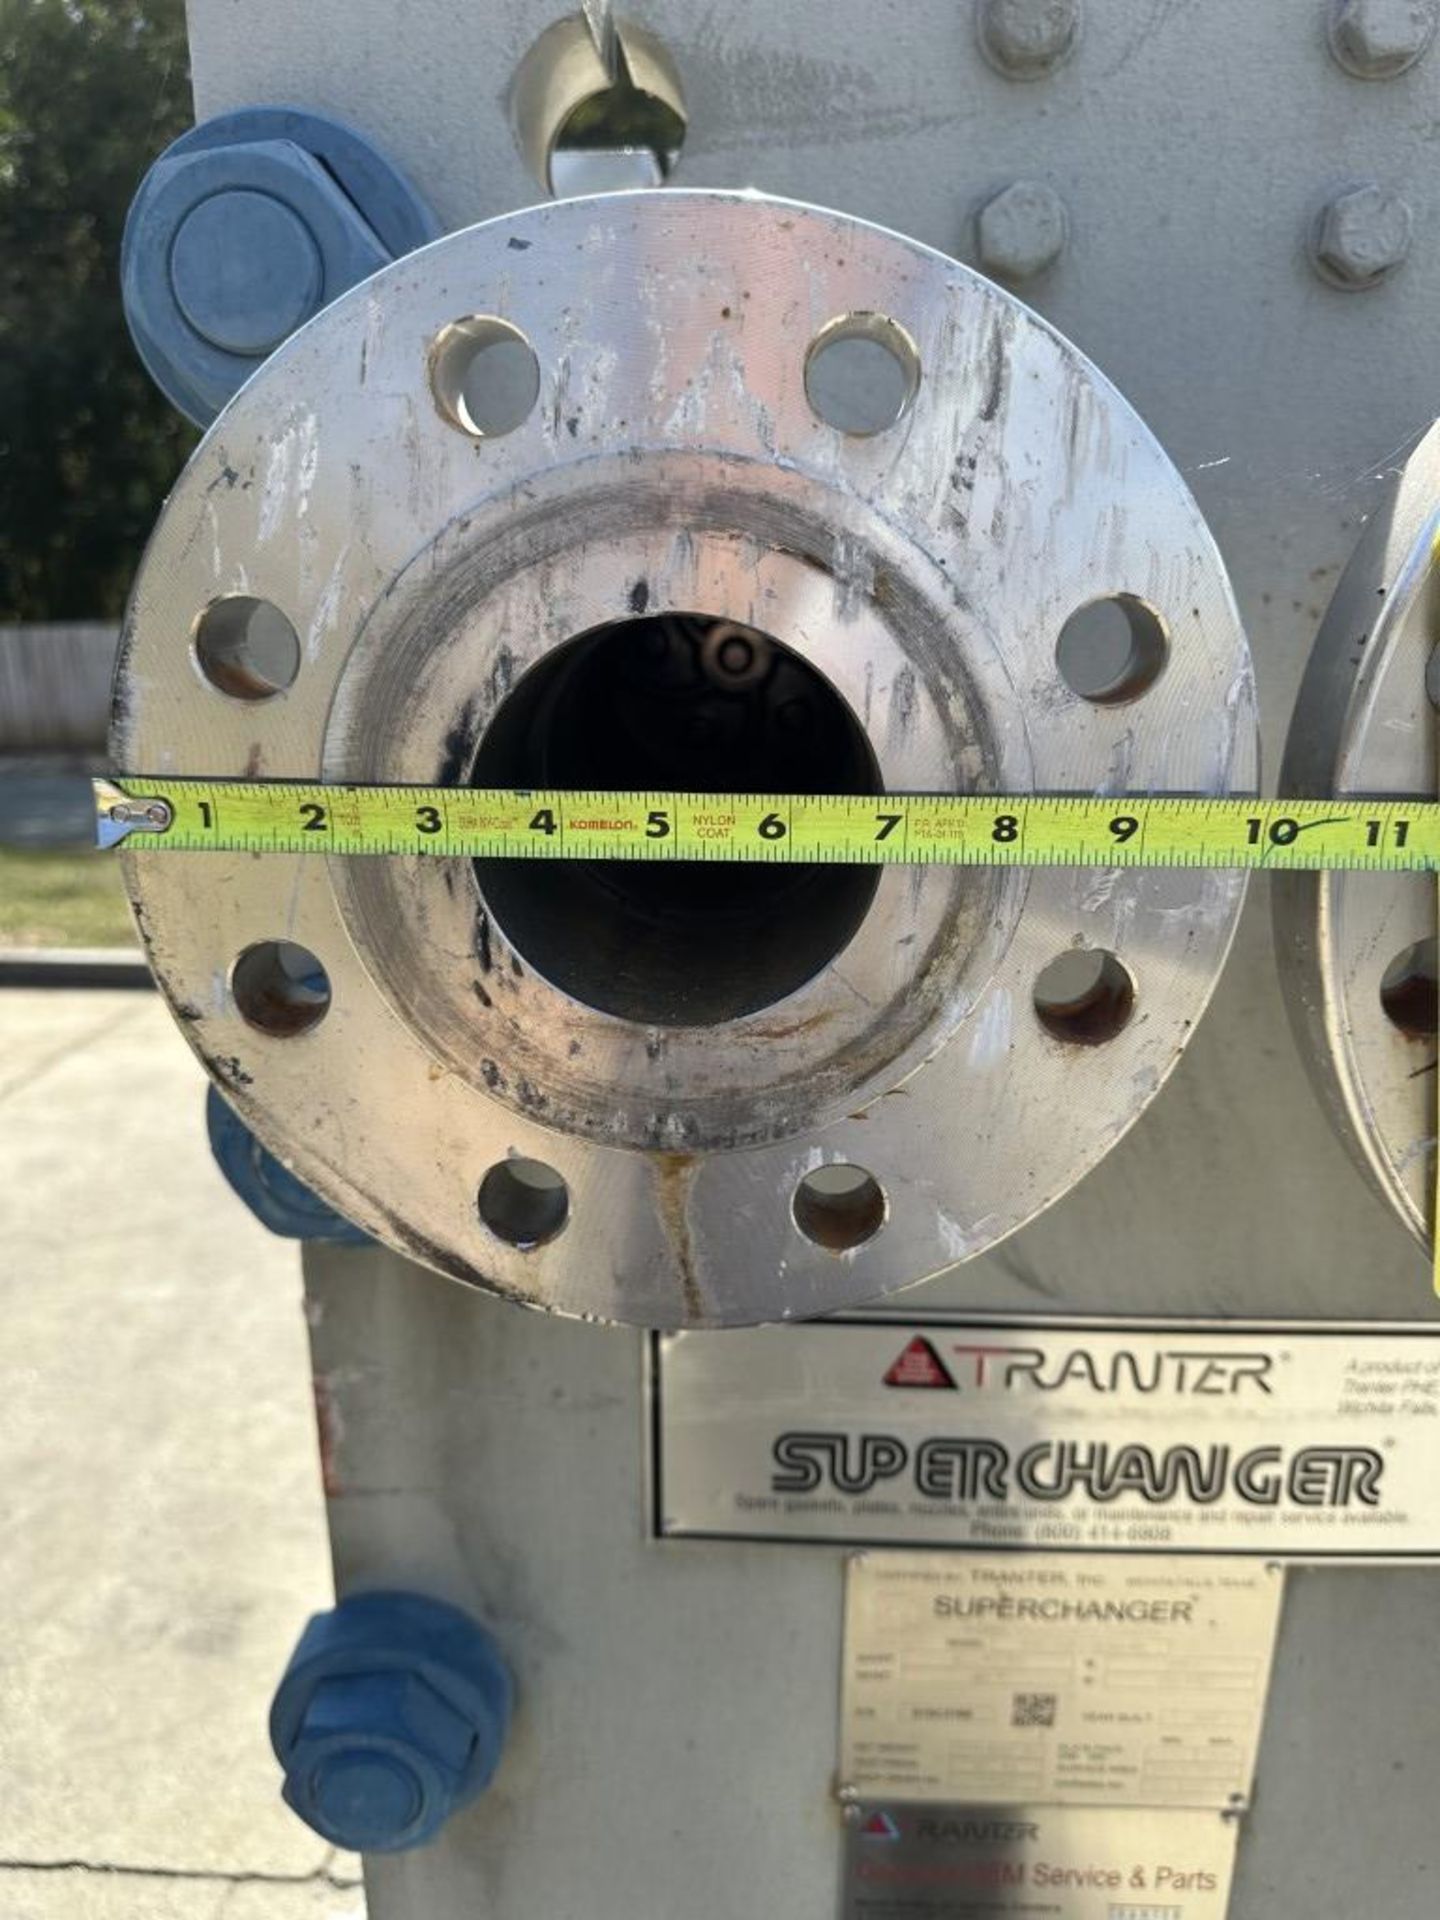 Lot Location: Greensboro NC 273.9 SQ. FT. TRANTER PLATE HEAT EXCHANGER ''SUPERCHANGER'' - Image 10 of 12